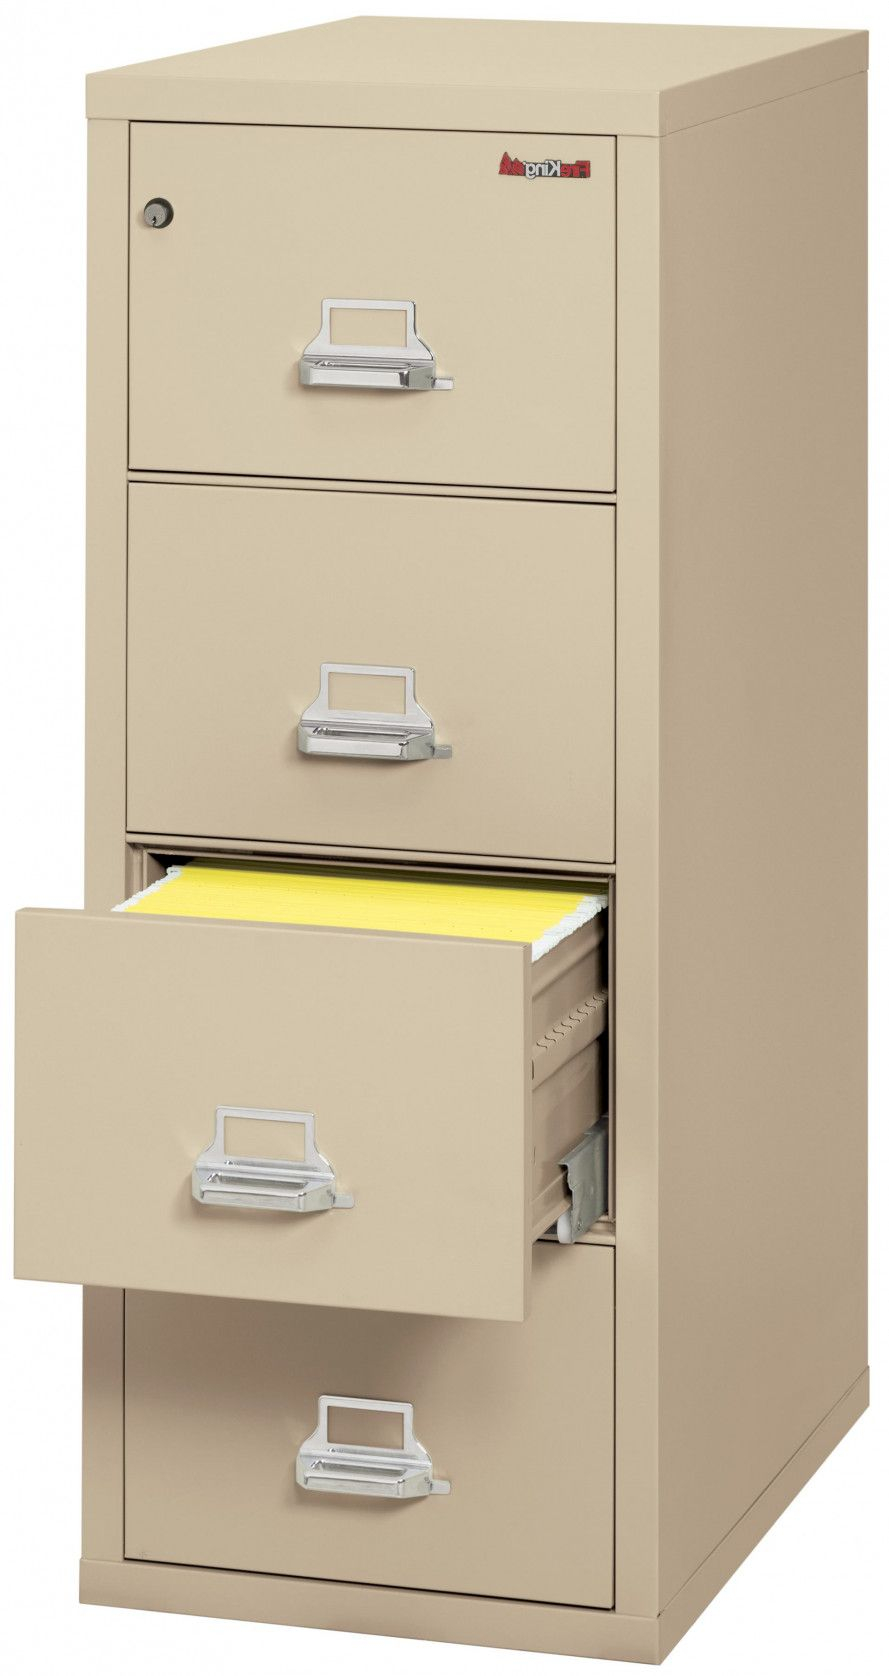 Pin Rahayu12 On Interior Analogi Office Cabinets Cabinet pertaining to size 889 X 1676